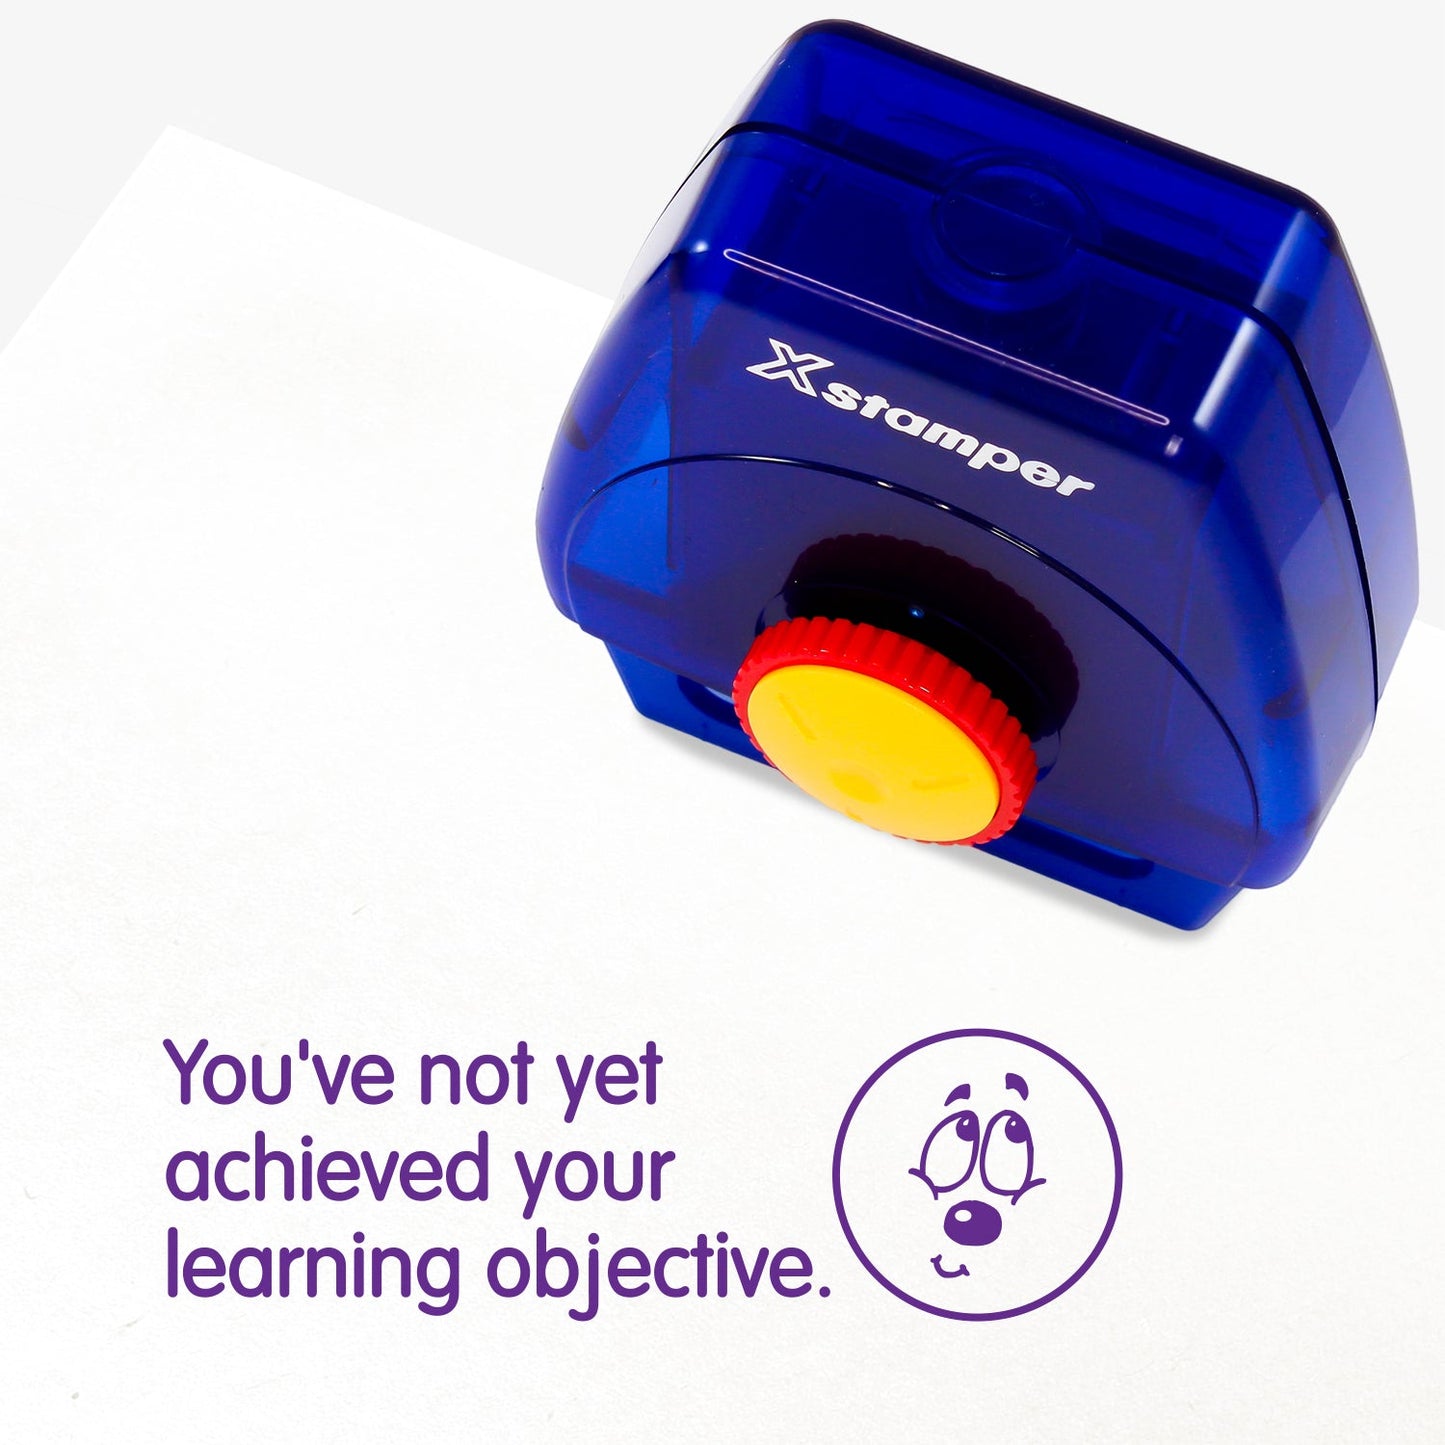 Not Achieved Learning Objective Unsure Twist N Stamp Brick - Purple